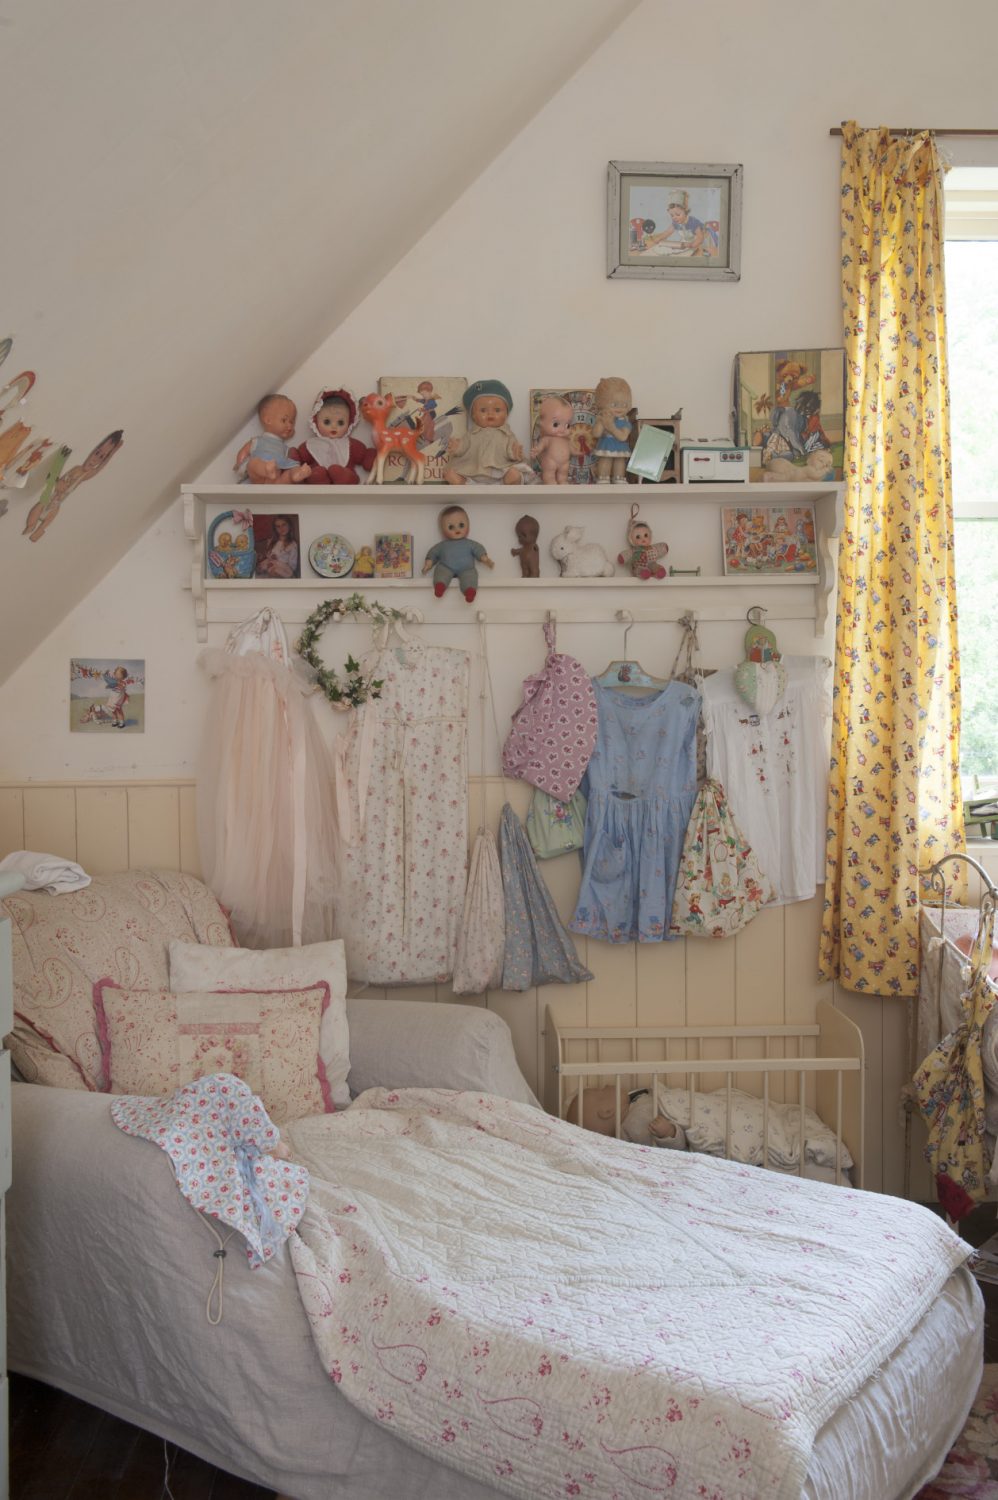 Bibby’s room is a delightful mix of buttermilk yellow and shell pink